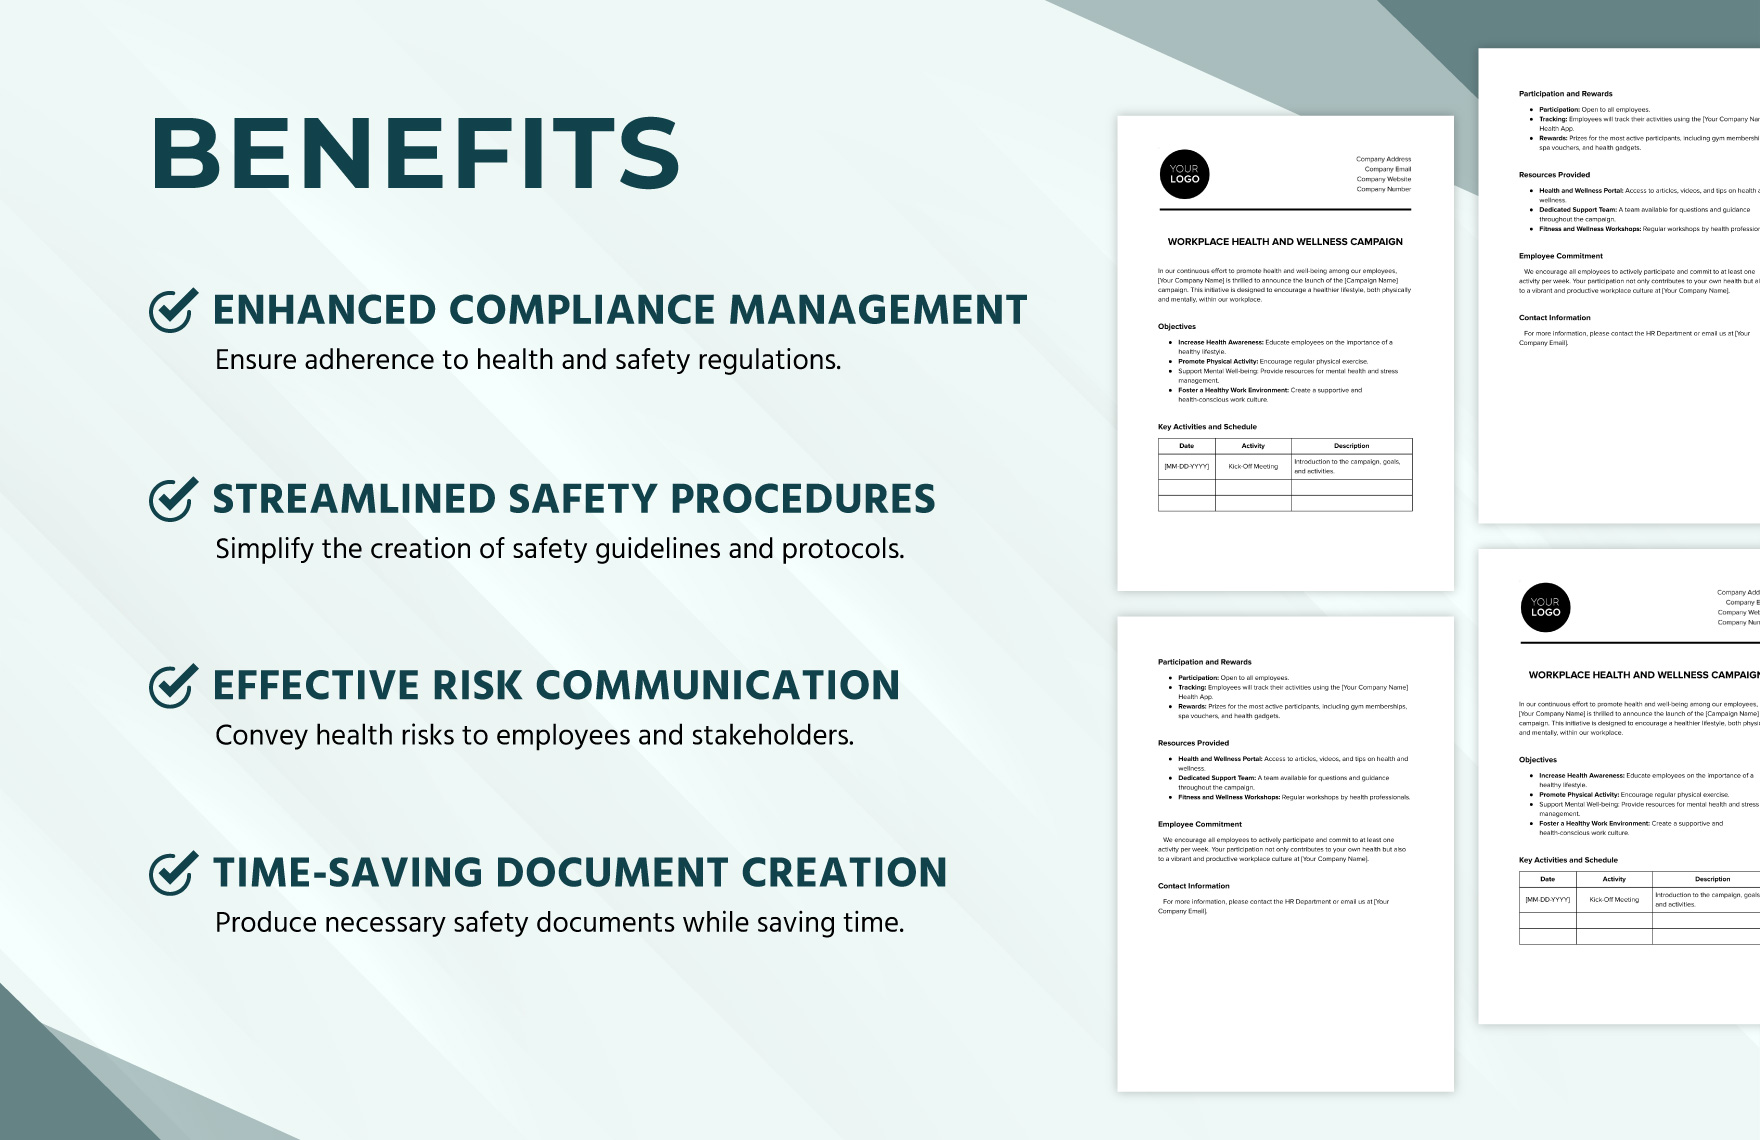 Workplace Health and Wellness Campaign Template